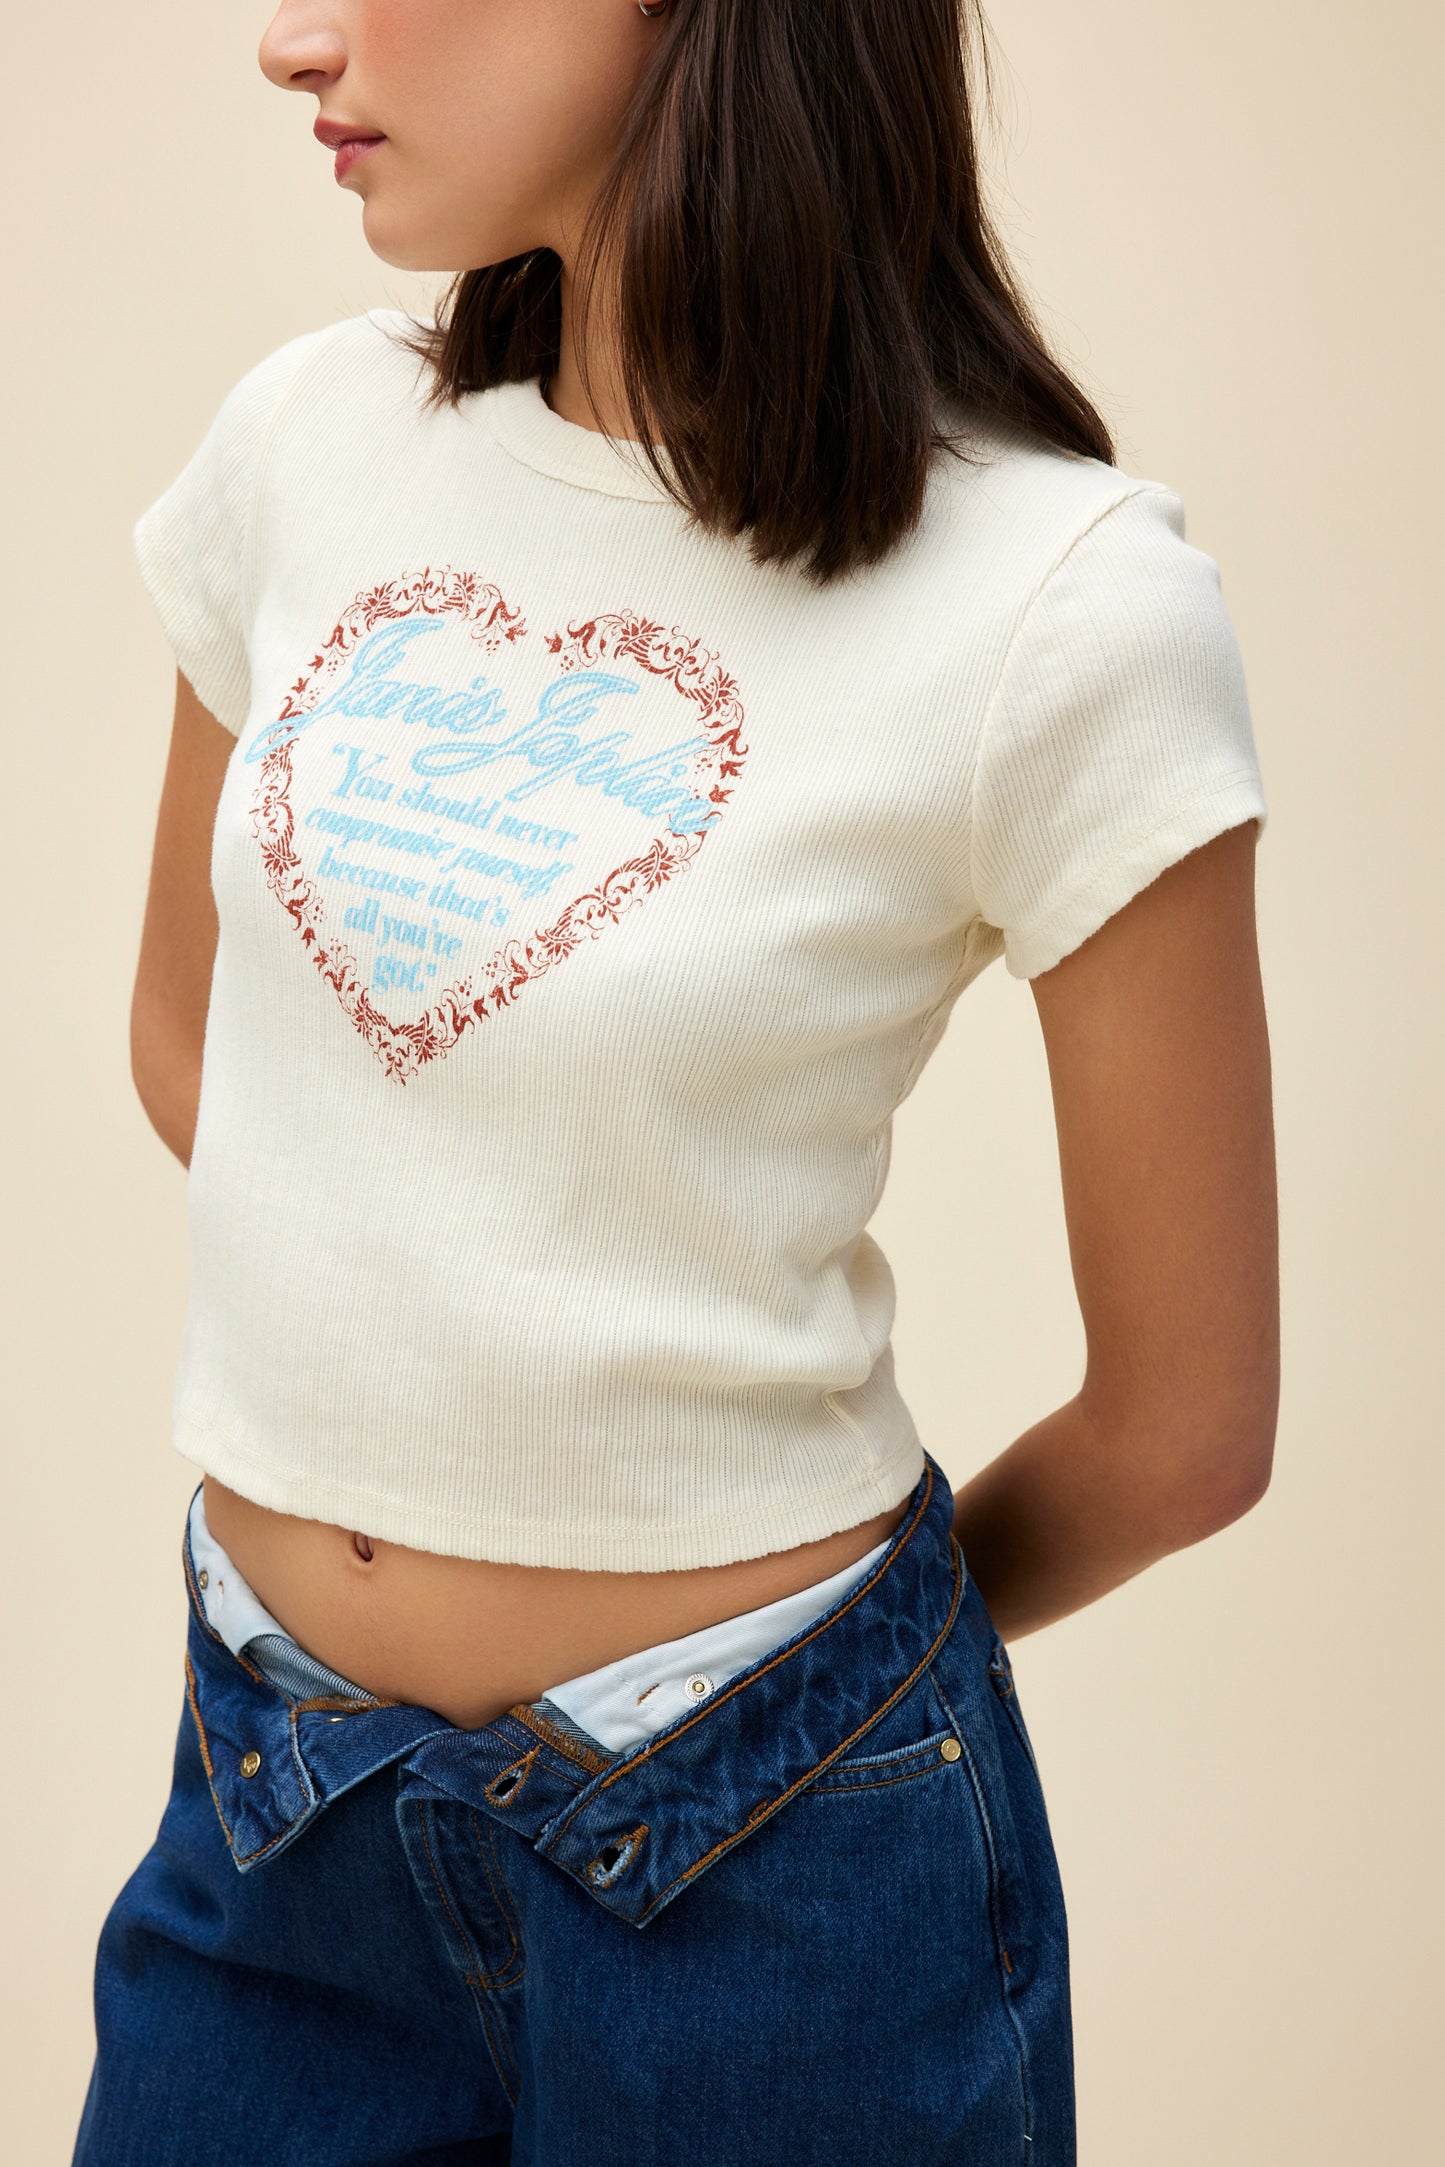 A model featuring a stone vintage baby tee featuring a red lace heart with Janis Joplin’s legendary ‘never compromise’ quote written in blue on the center. 